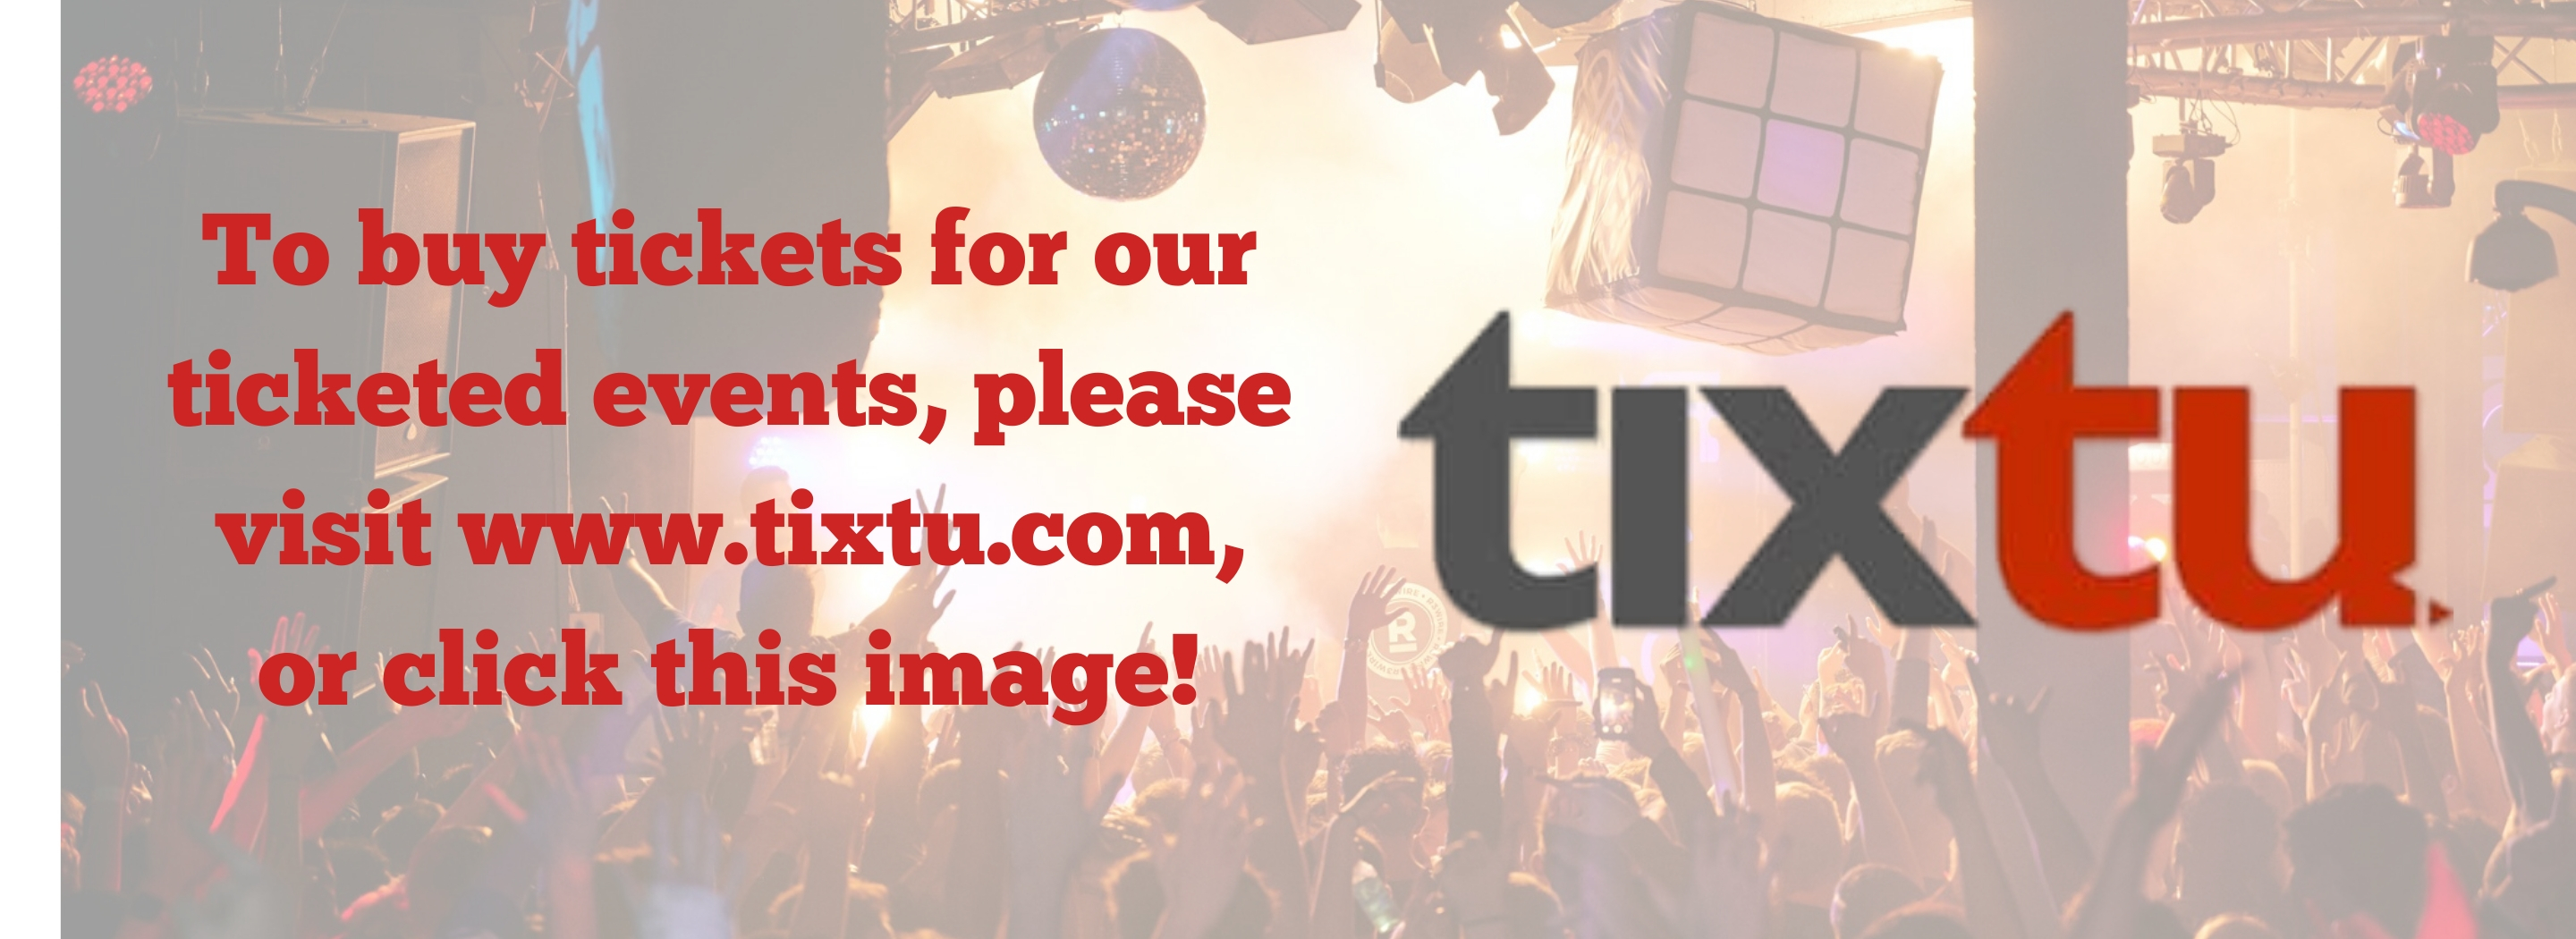 To buy tickets for our ticketed events, please visit www.tixtu.com, or click this image!.jpg